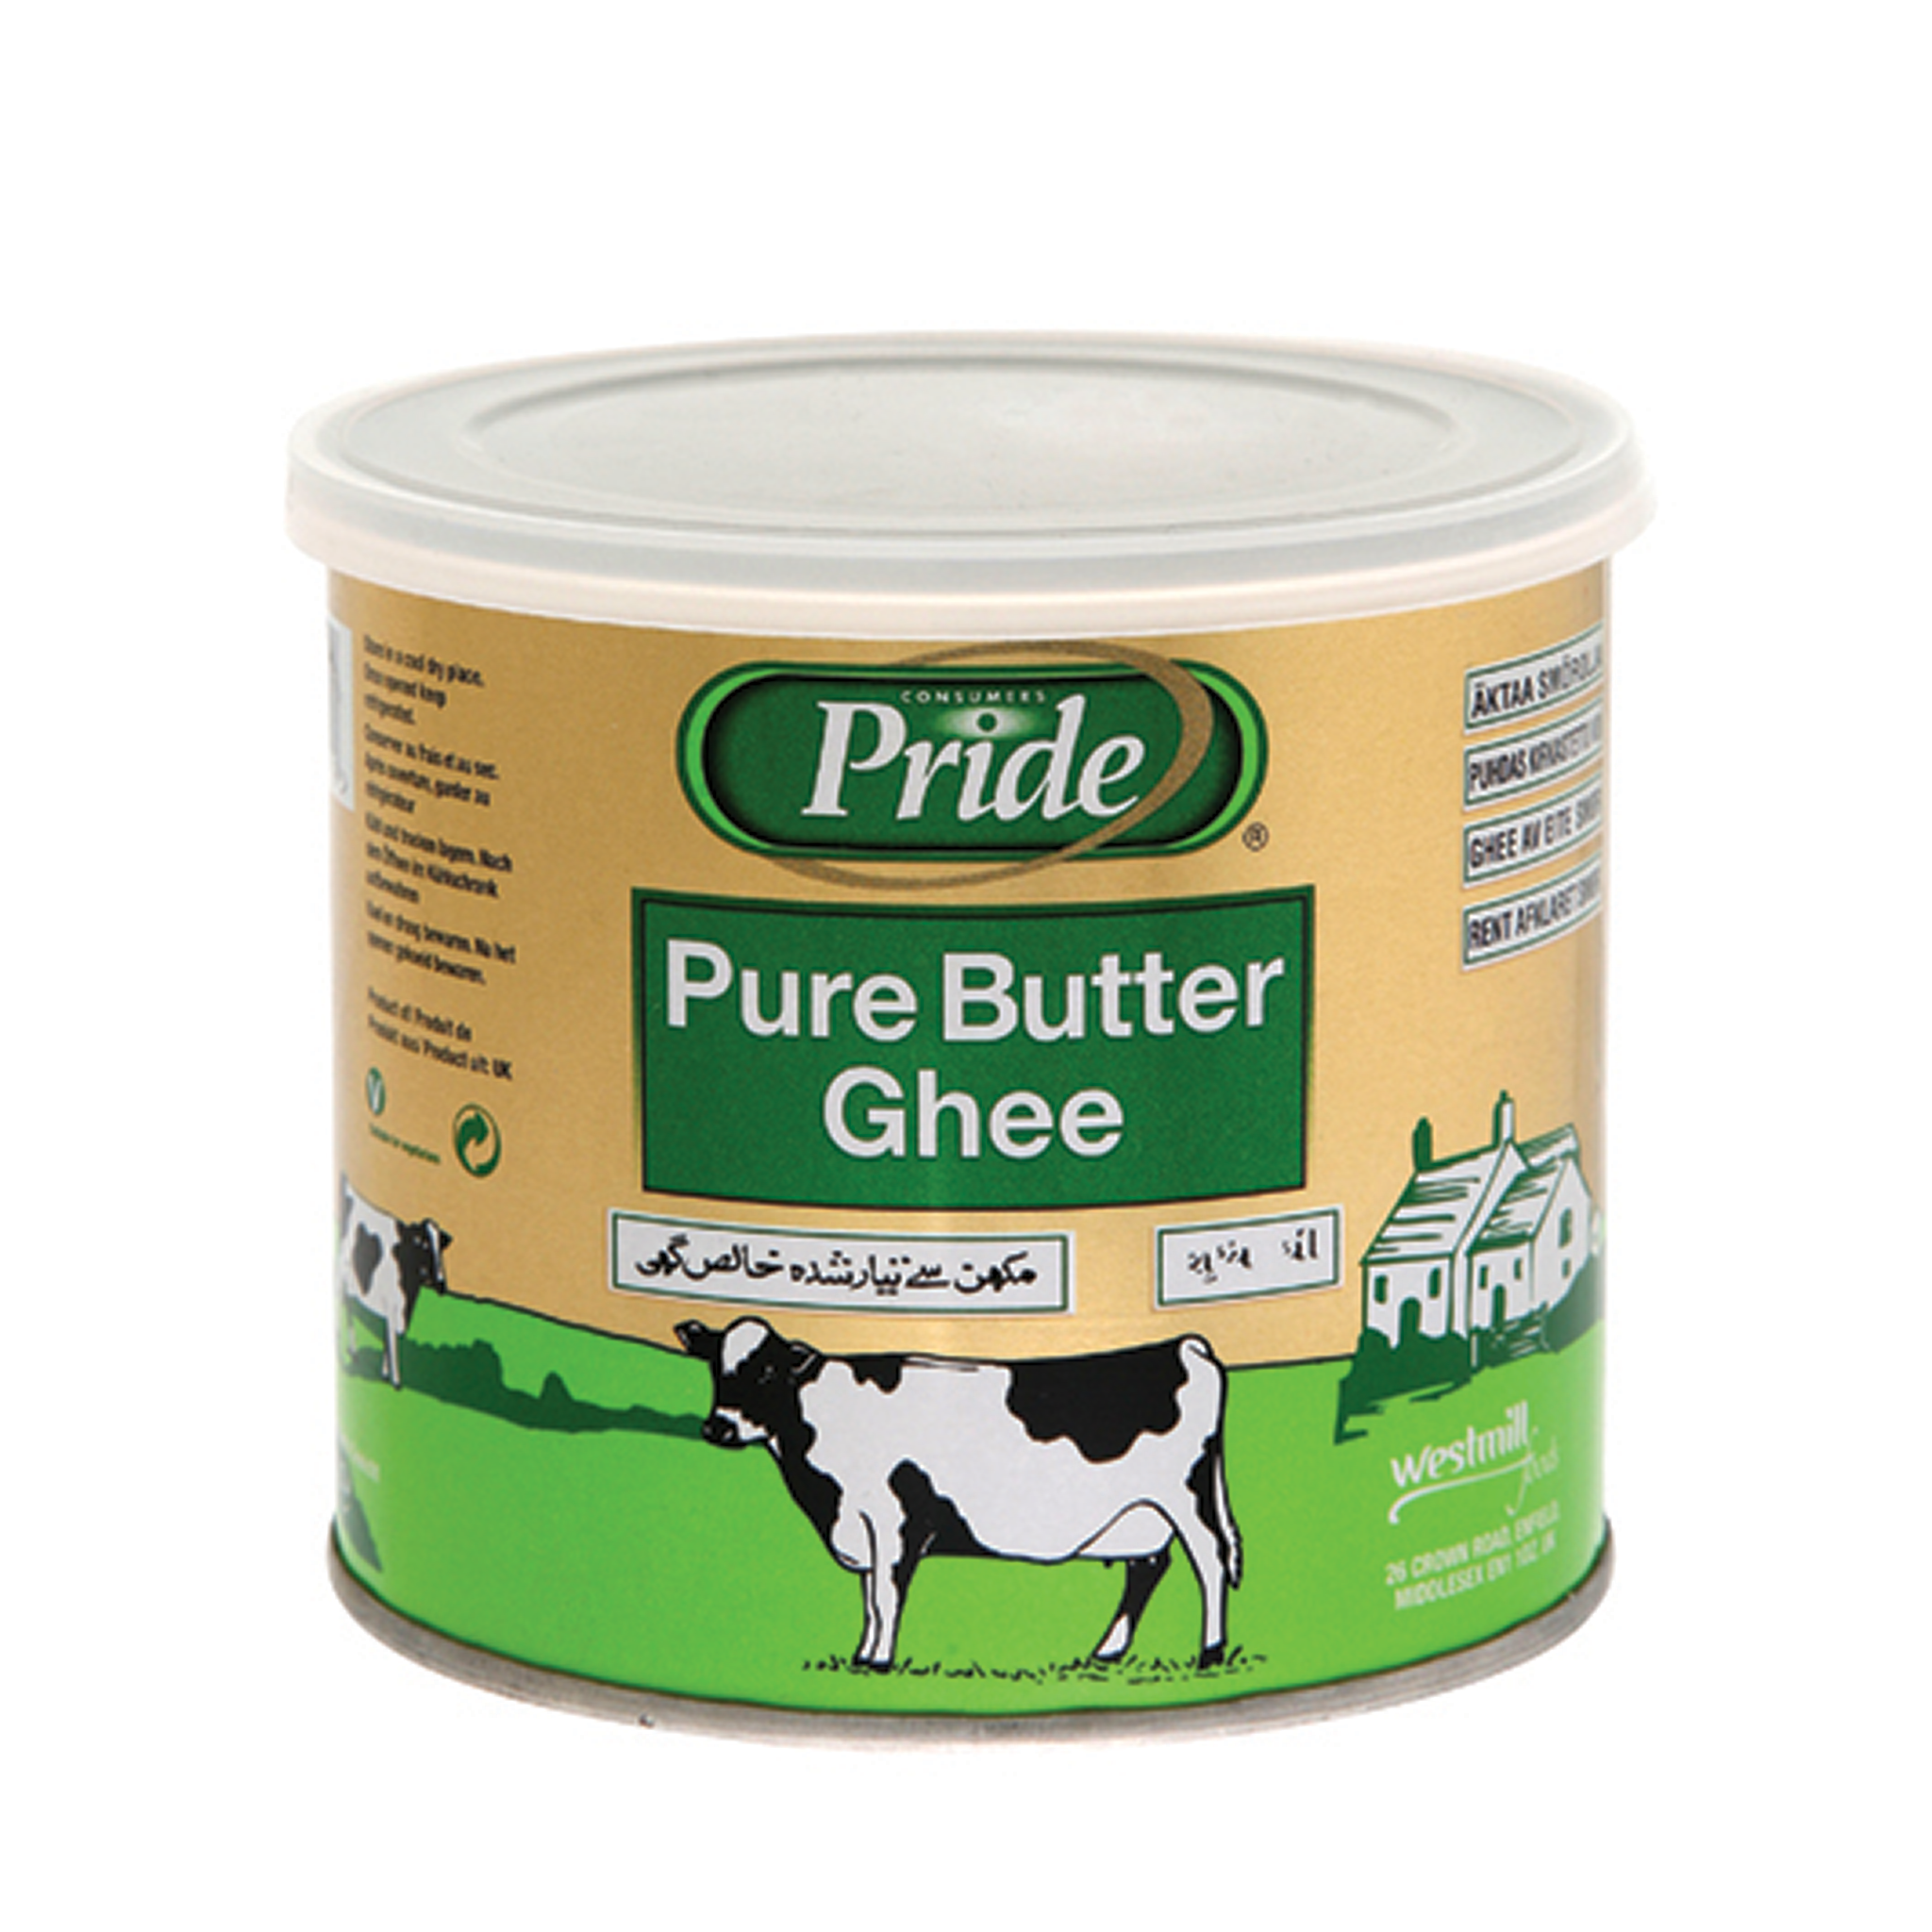 Pure Butter Ghee 500g By Pride